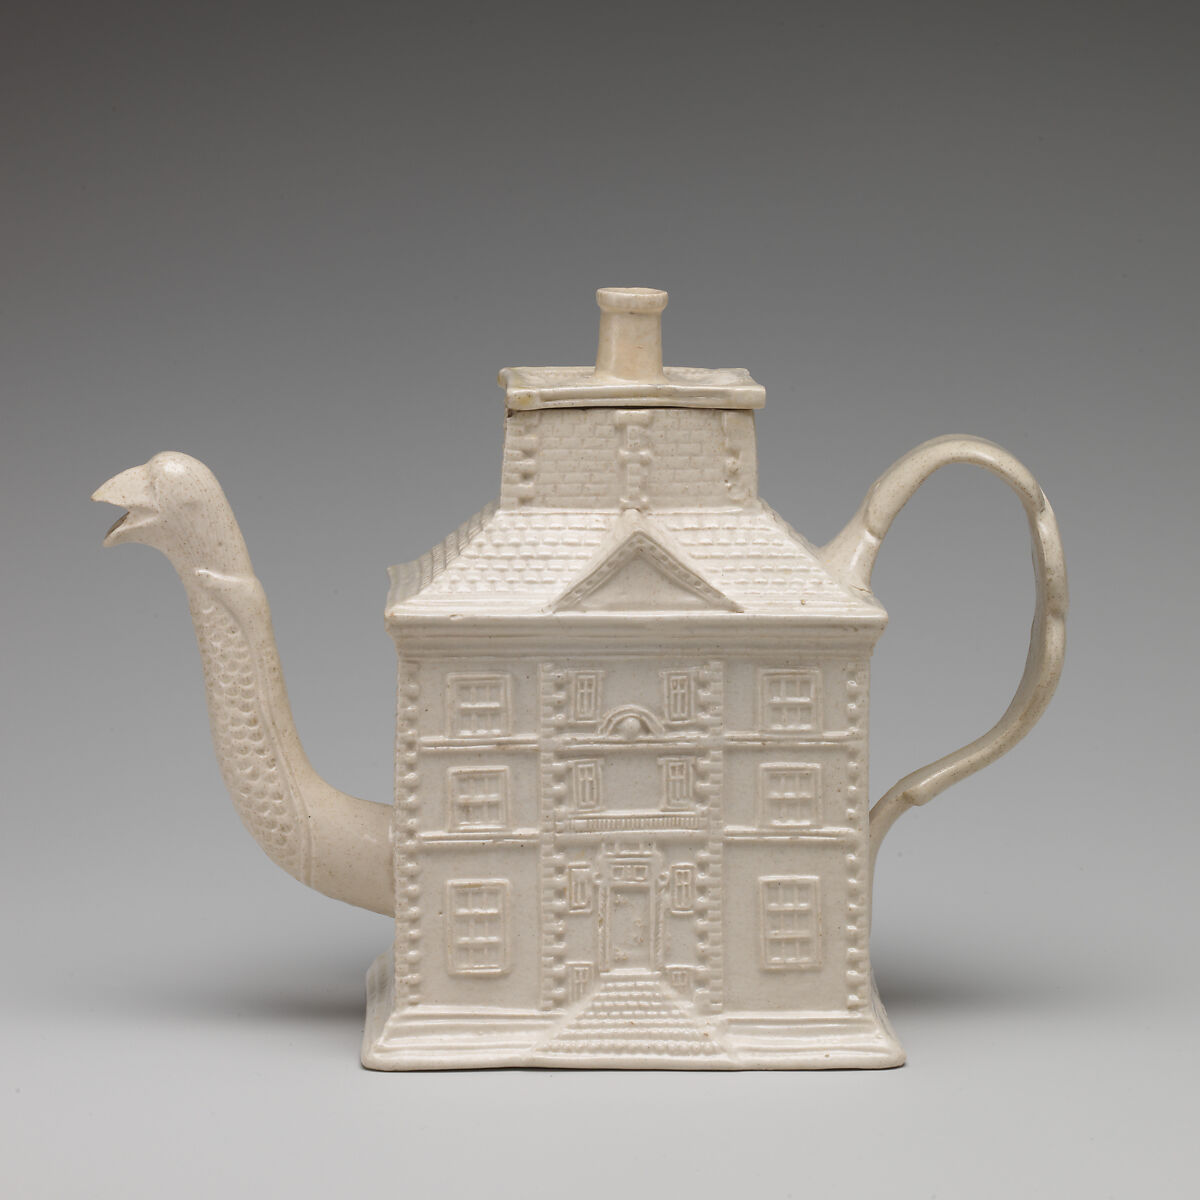 Teapot in the form of a house, Salt-glazed stoneware, British, Staffordshire 